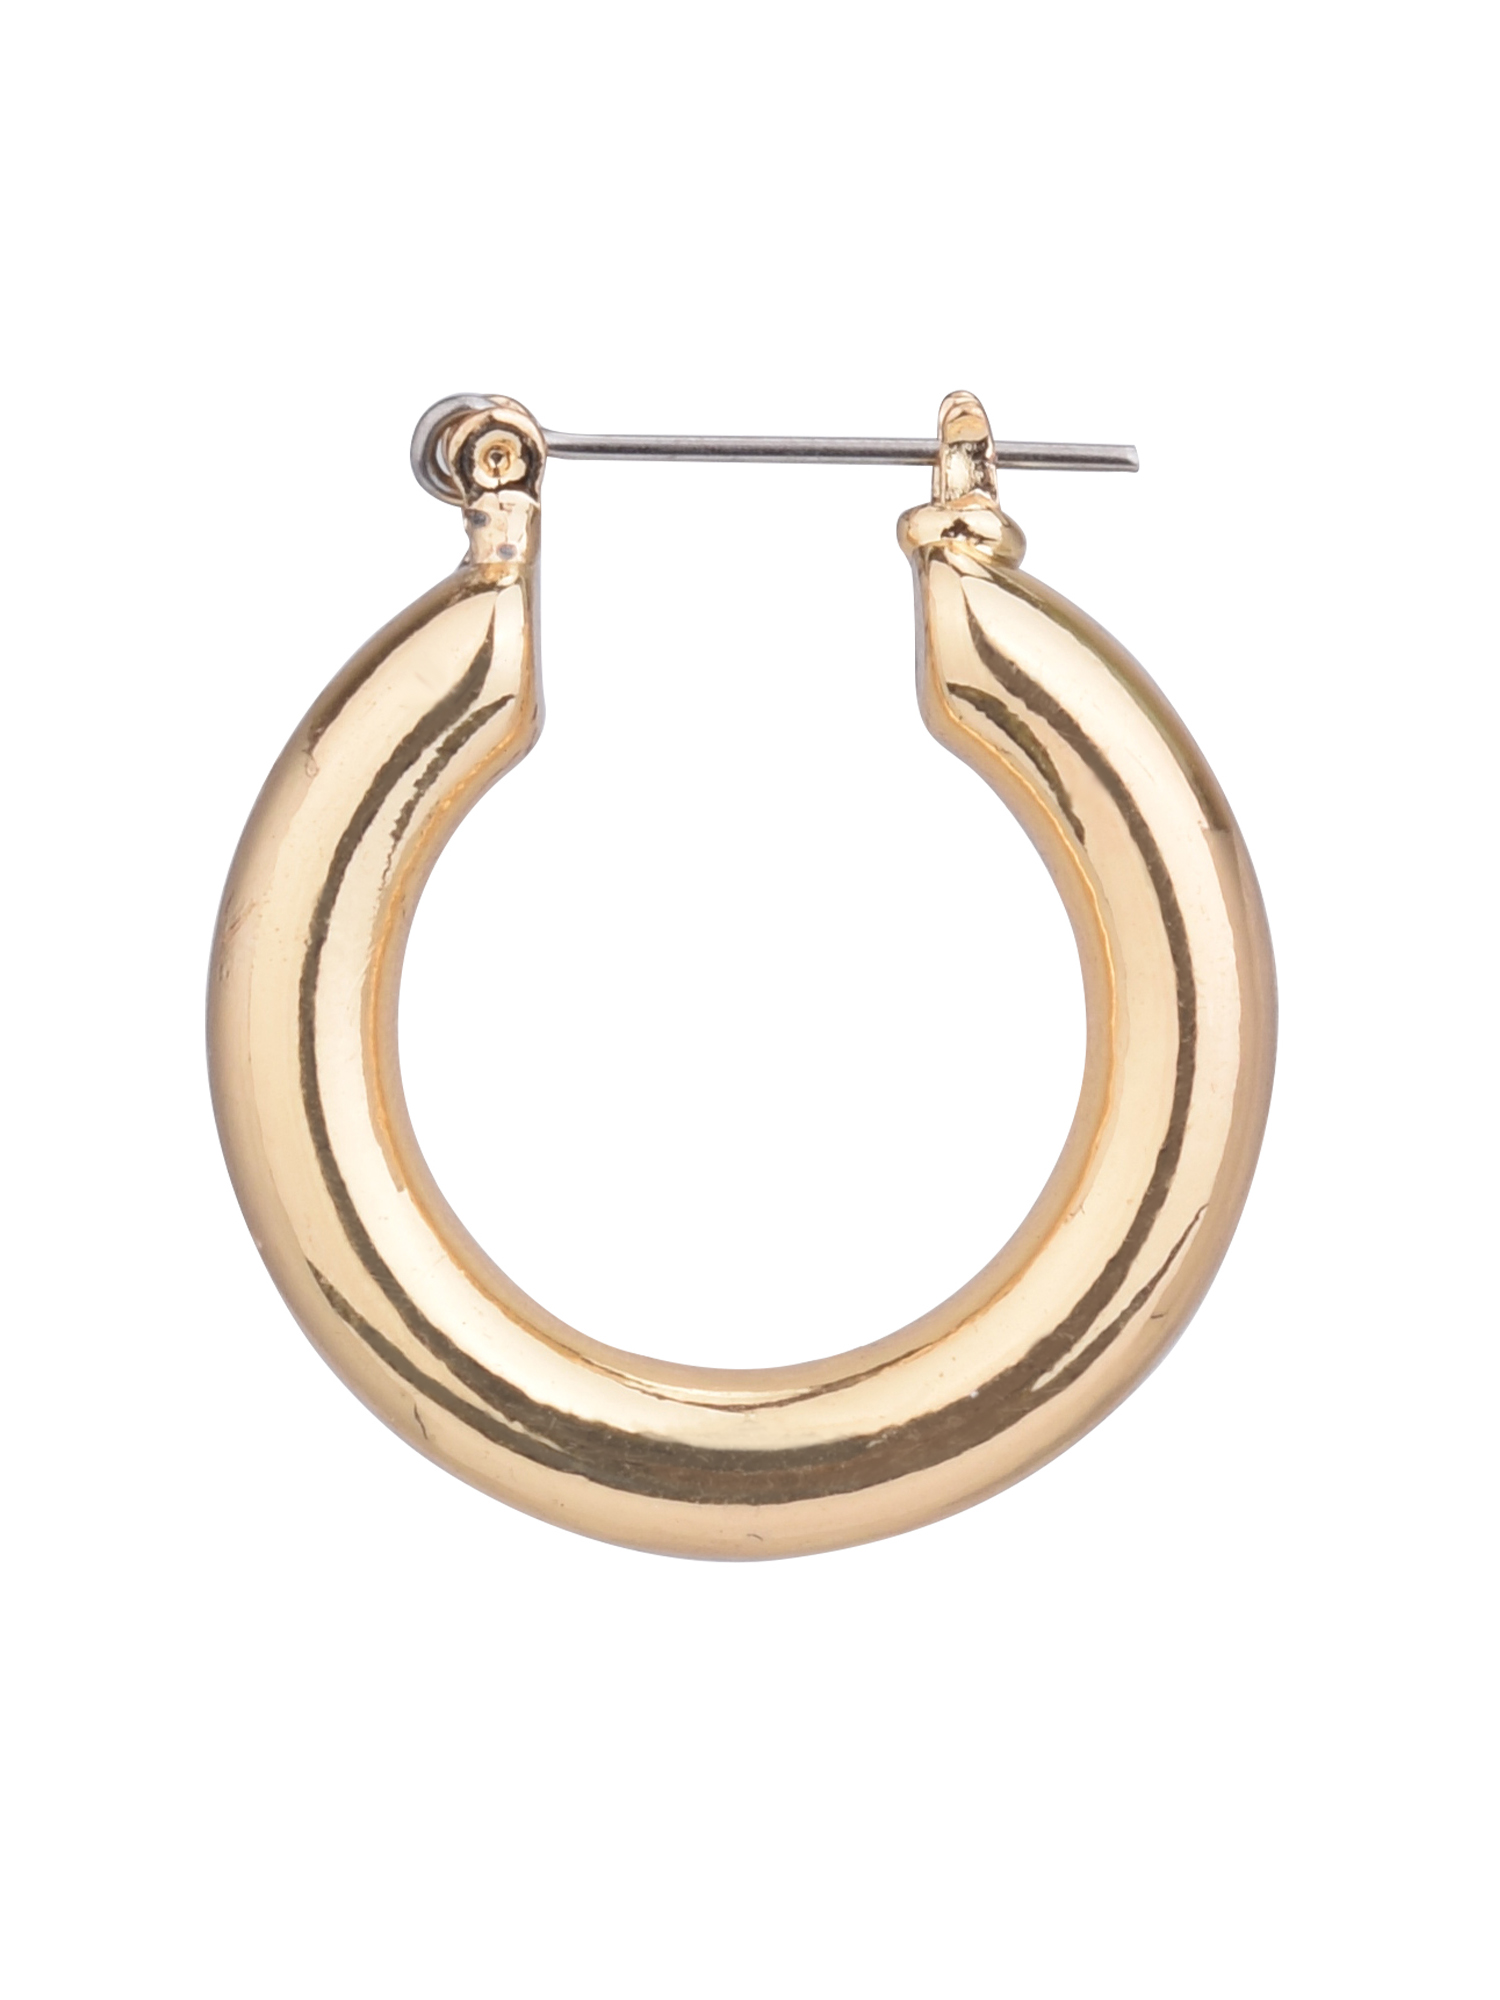 Time and Tru Women's Gold Medium Thick Hoop Earring - image 3 of 5